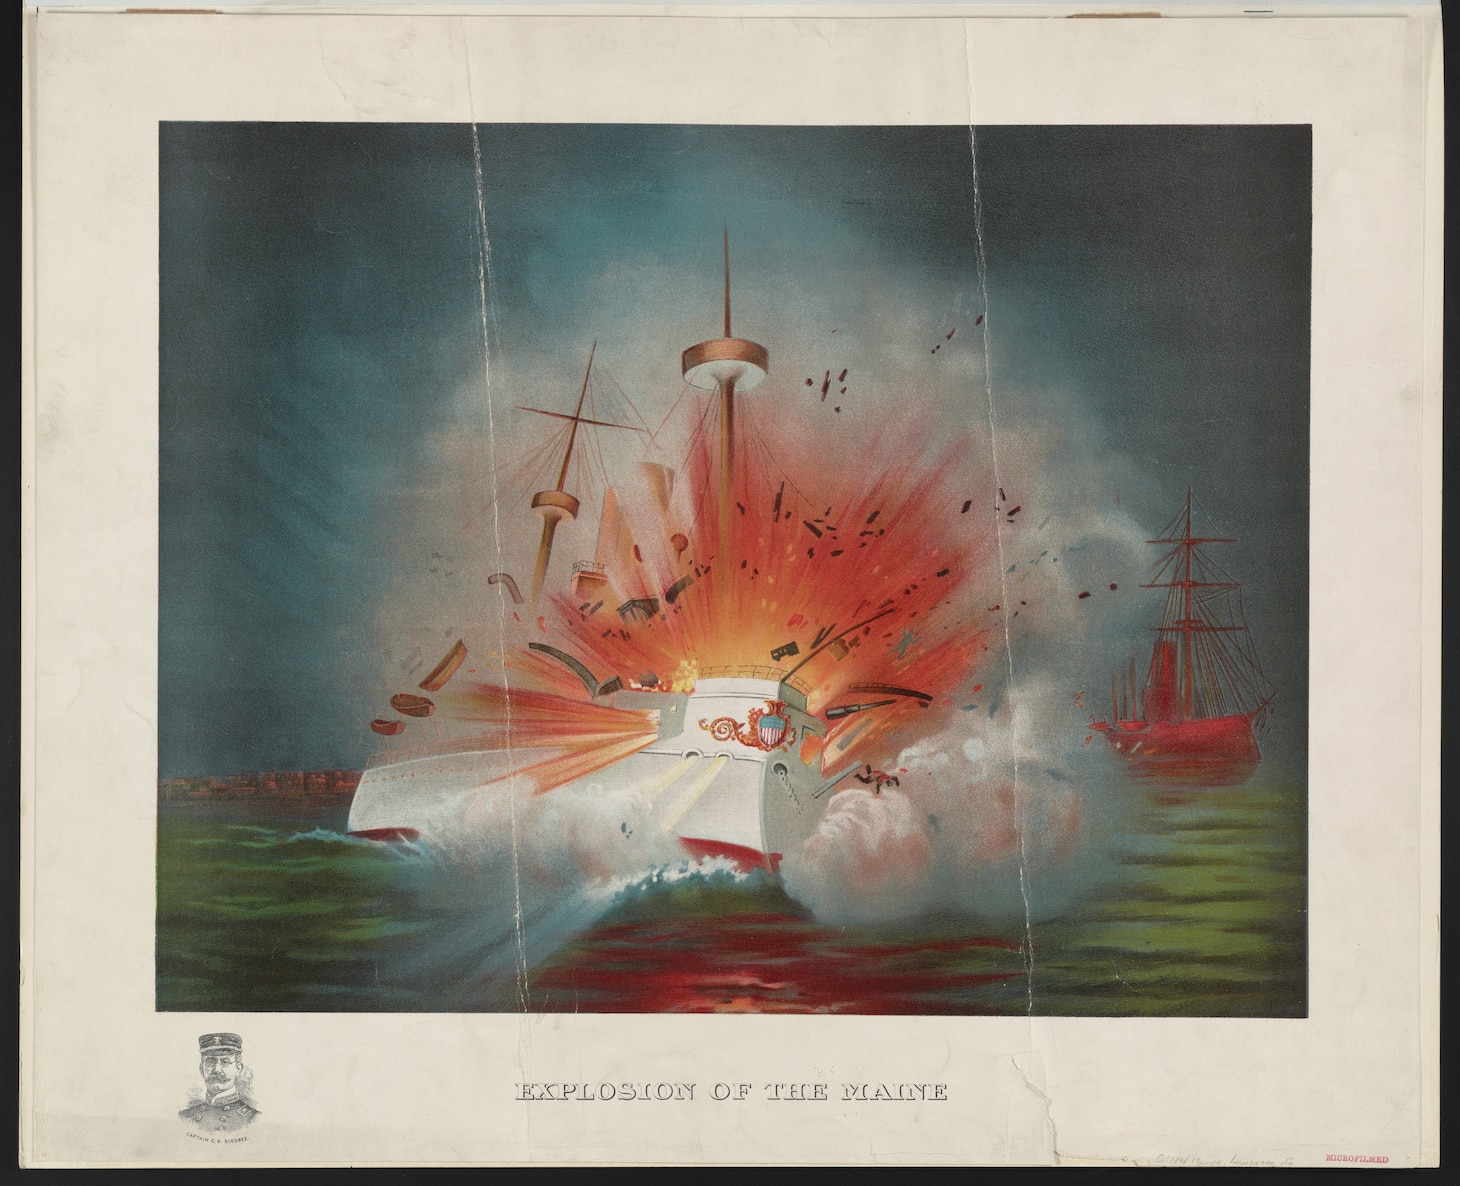 Print shows the U.S.S. Maine blowing up in the harbor at Havana, Cuba; a small portrait of Captain C. D. Sigsbee decorates the lower left margin.